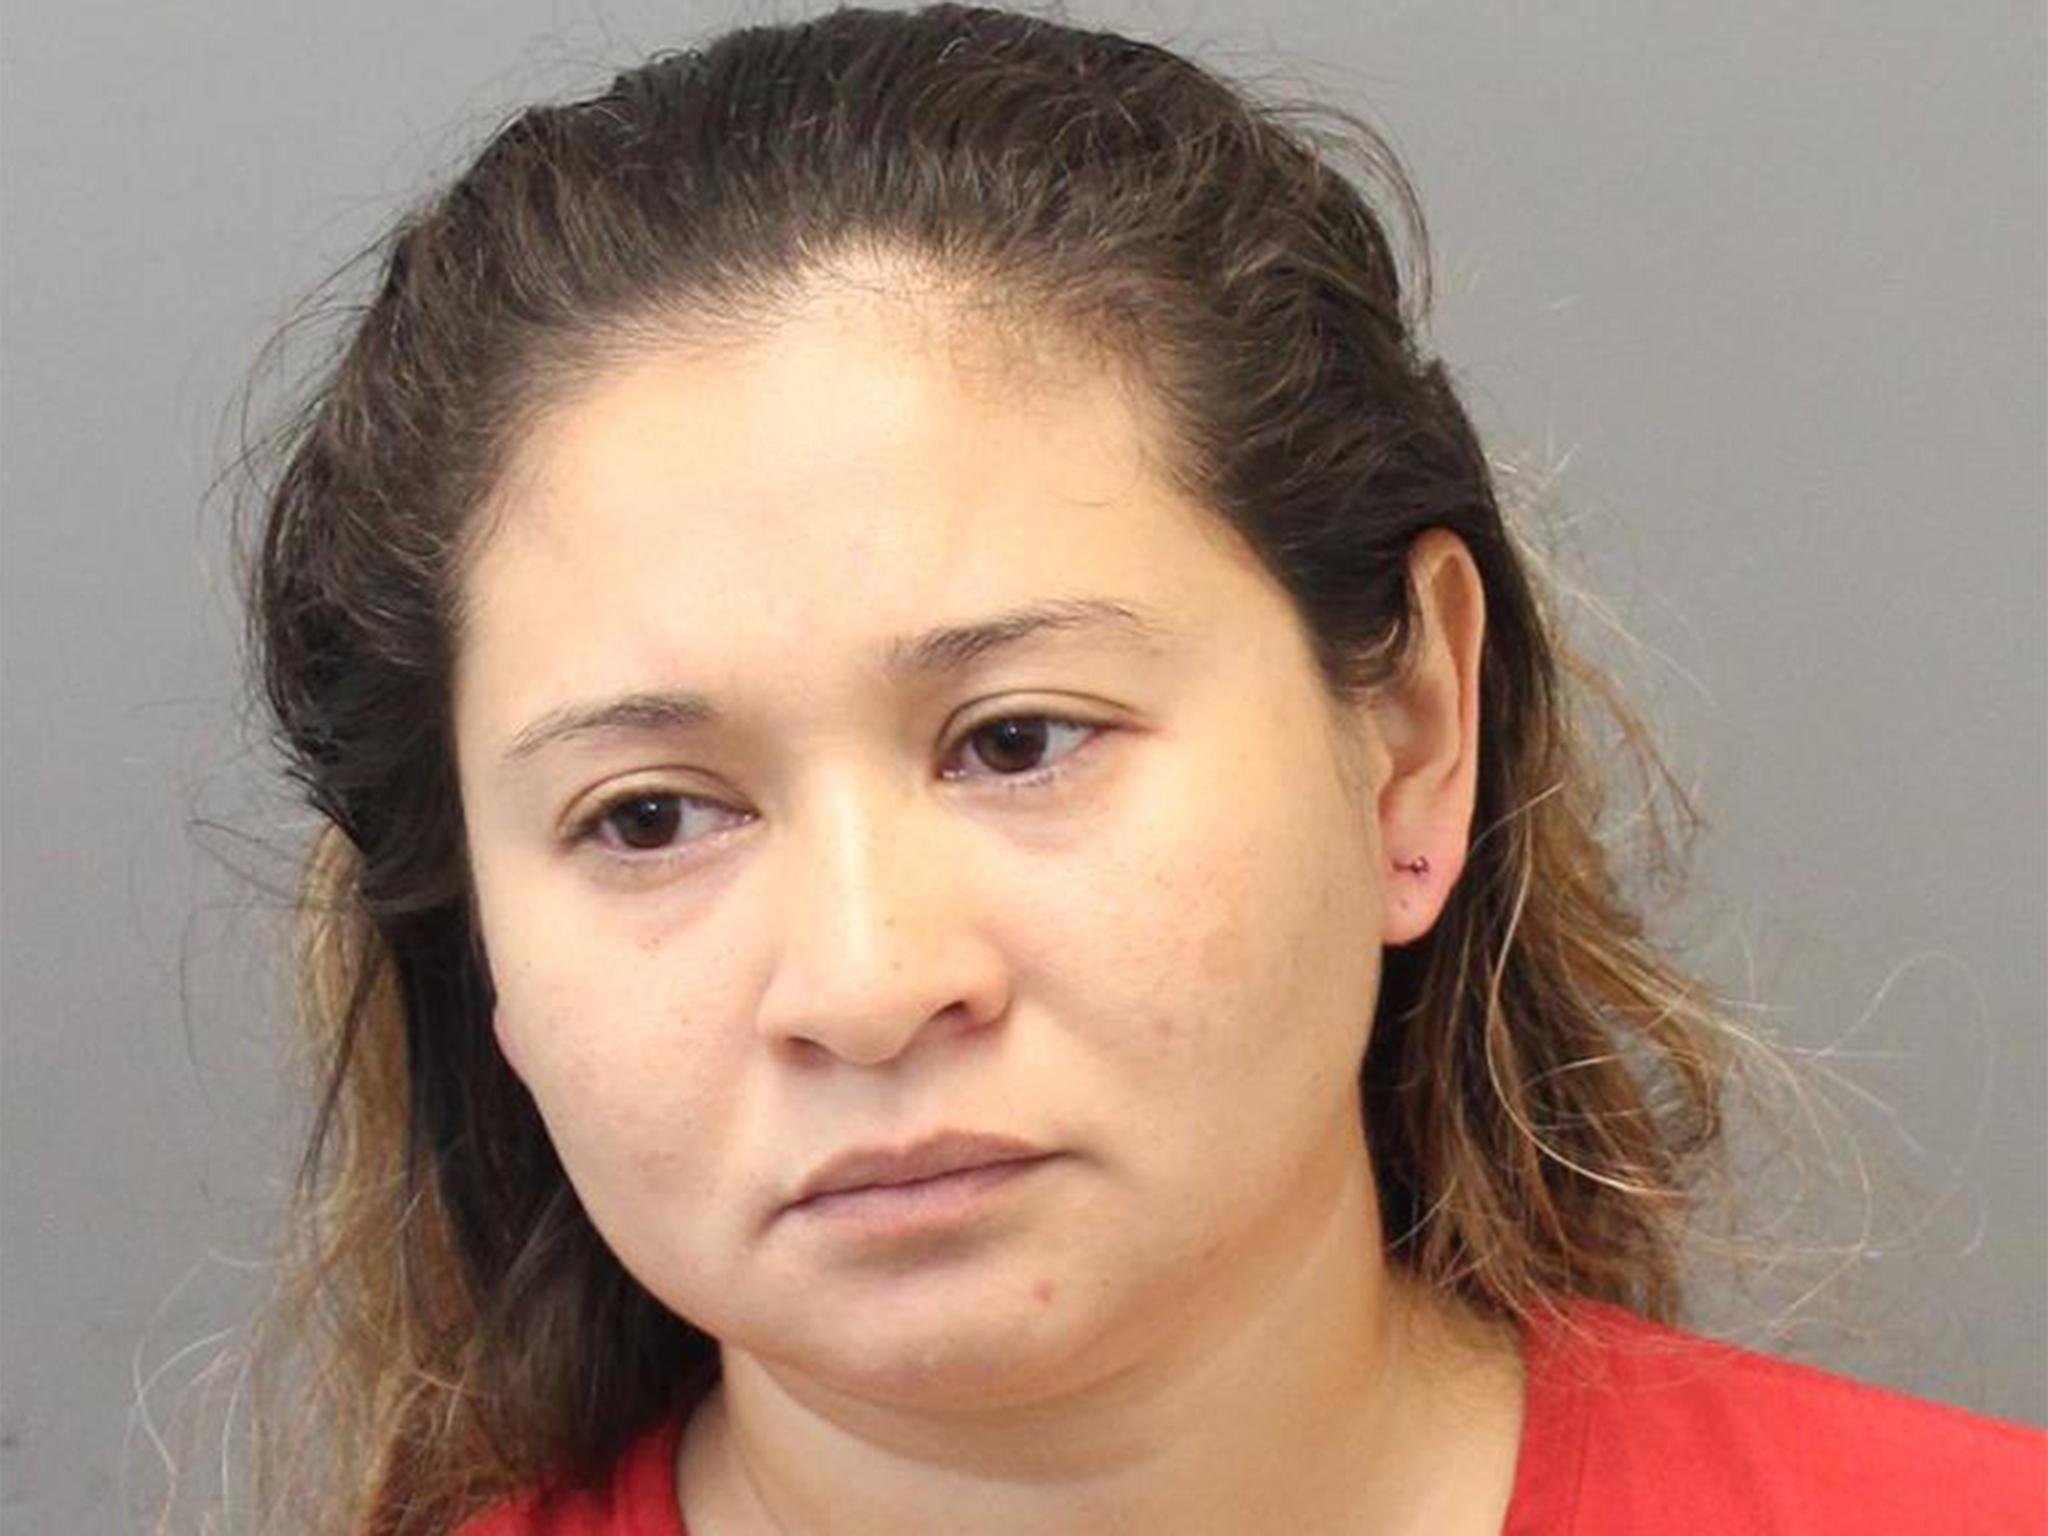 Workers began to collect evidence against Ms Rivera-Juarez after several of them fell ill